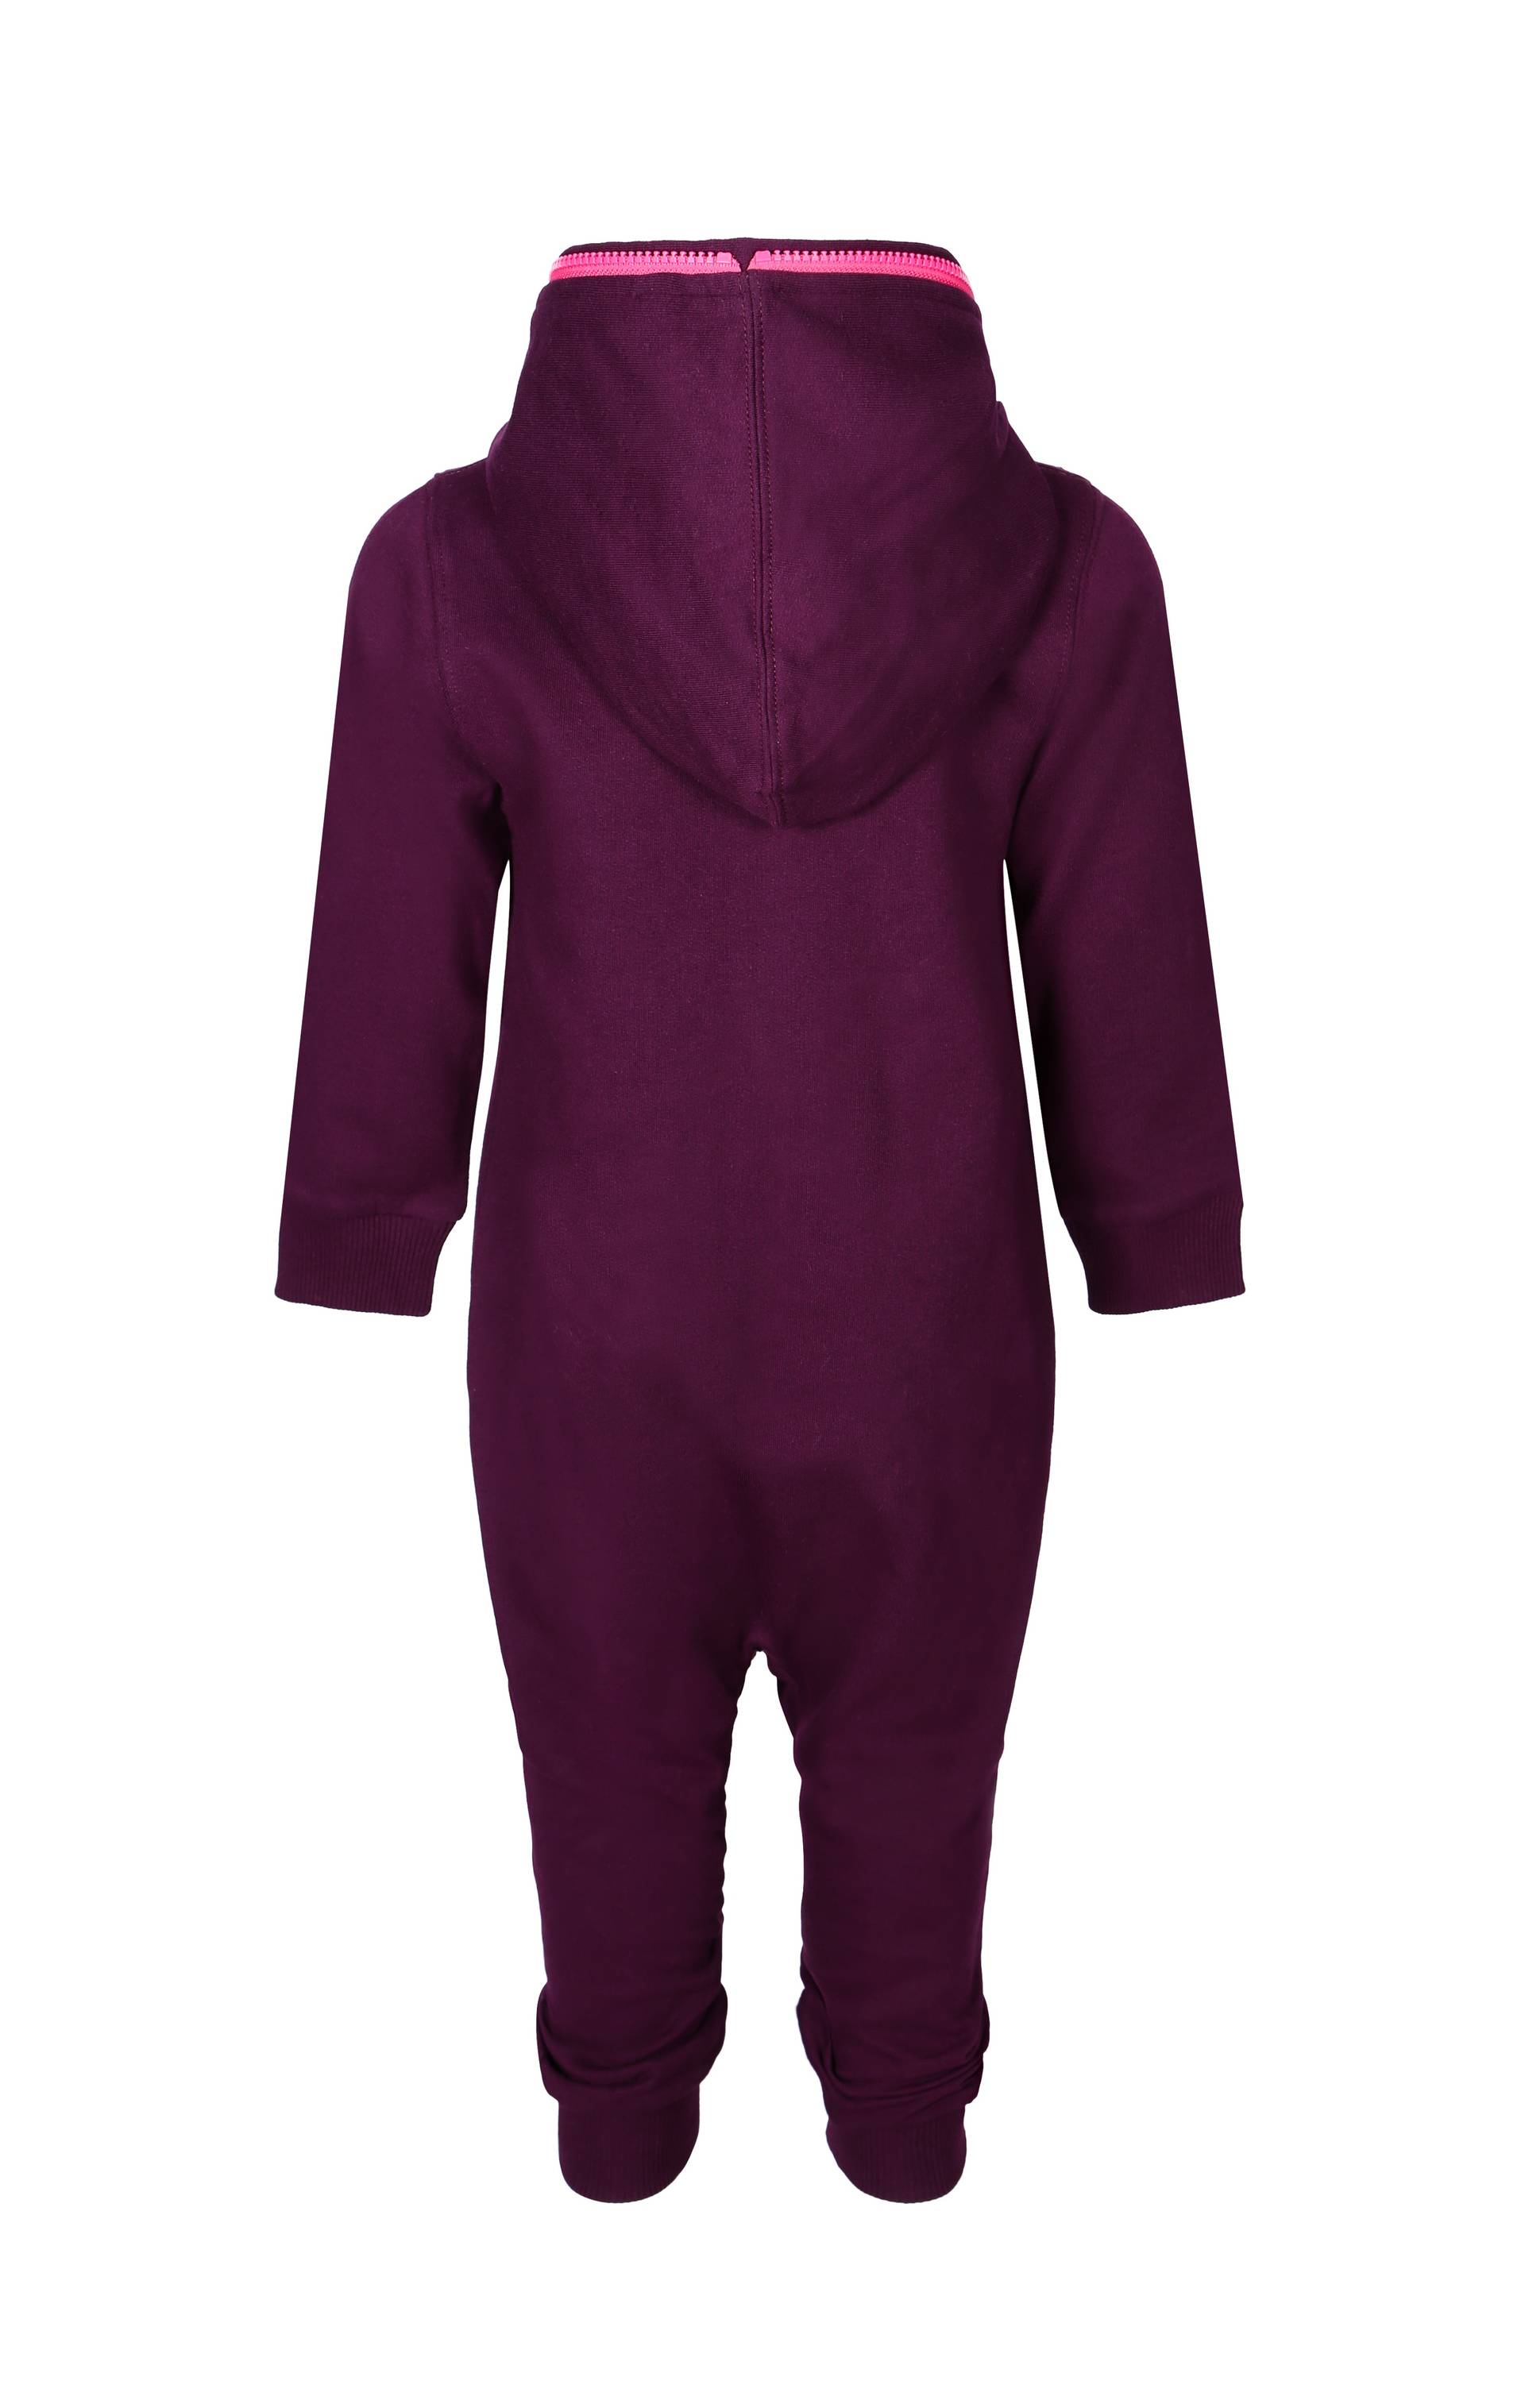 Onepiece Solid Baby Jumpsuit Burgundy - 2